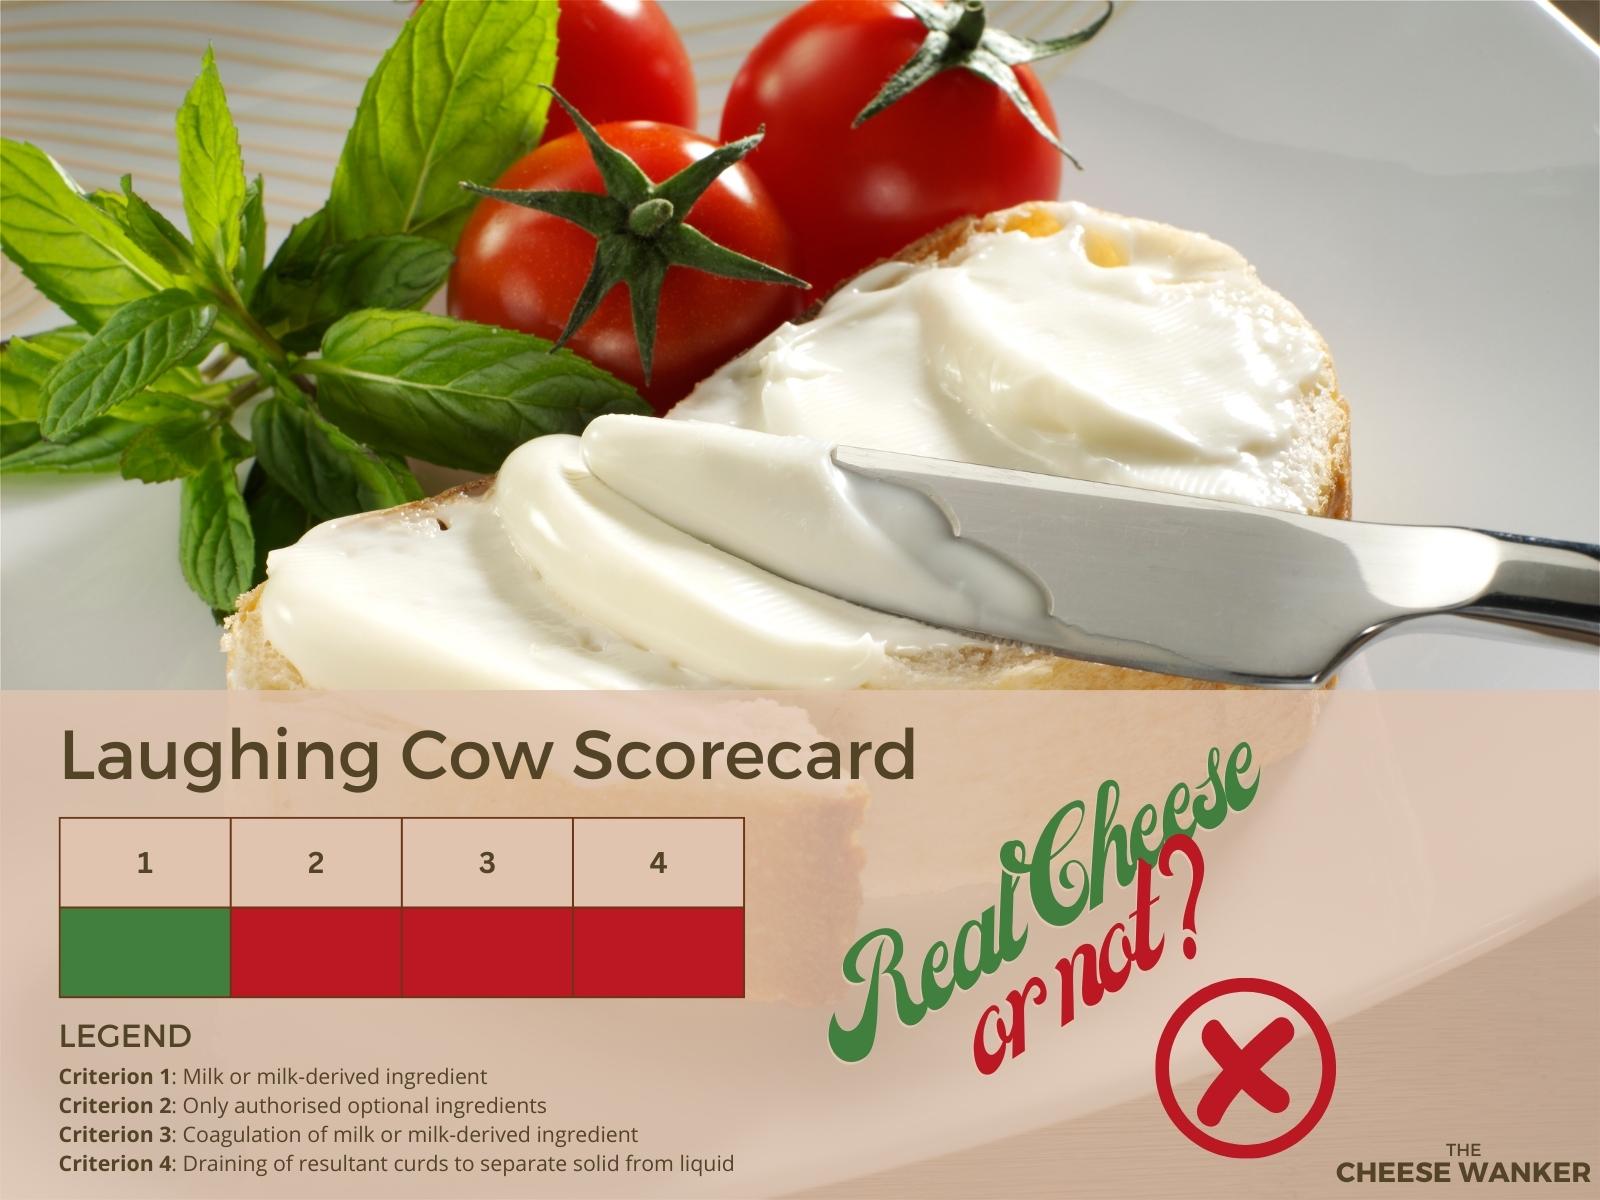 The Laughing Cow Scorecard